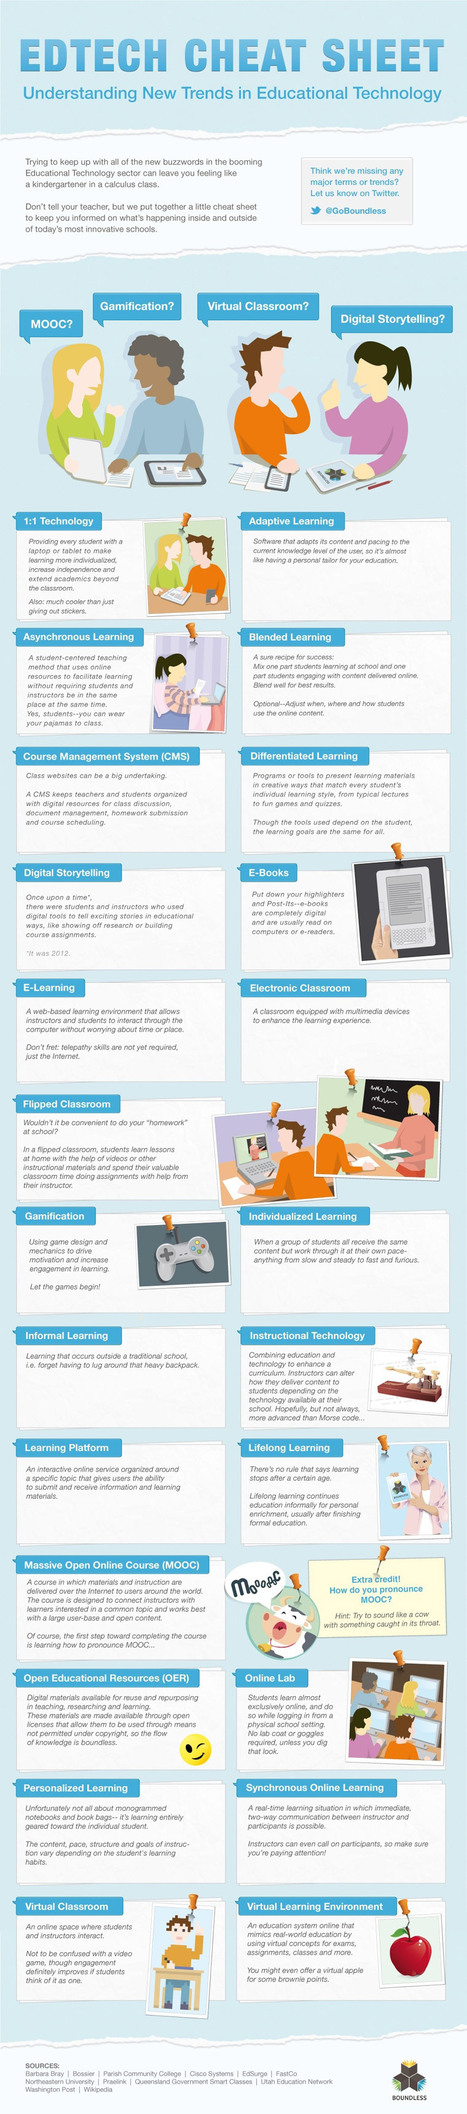 24 Ed-Tech Terms You Should Know [Infographic] | Create, Innovate & Evaluate in Higher Education | Scoop.it